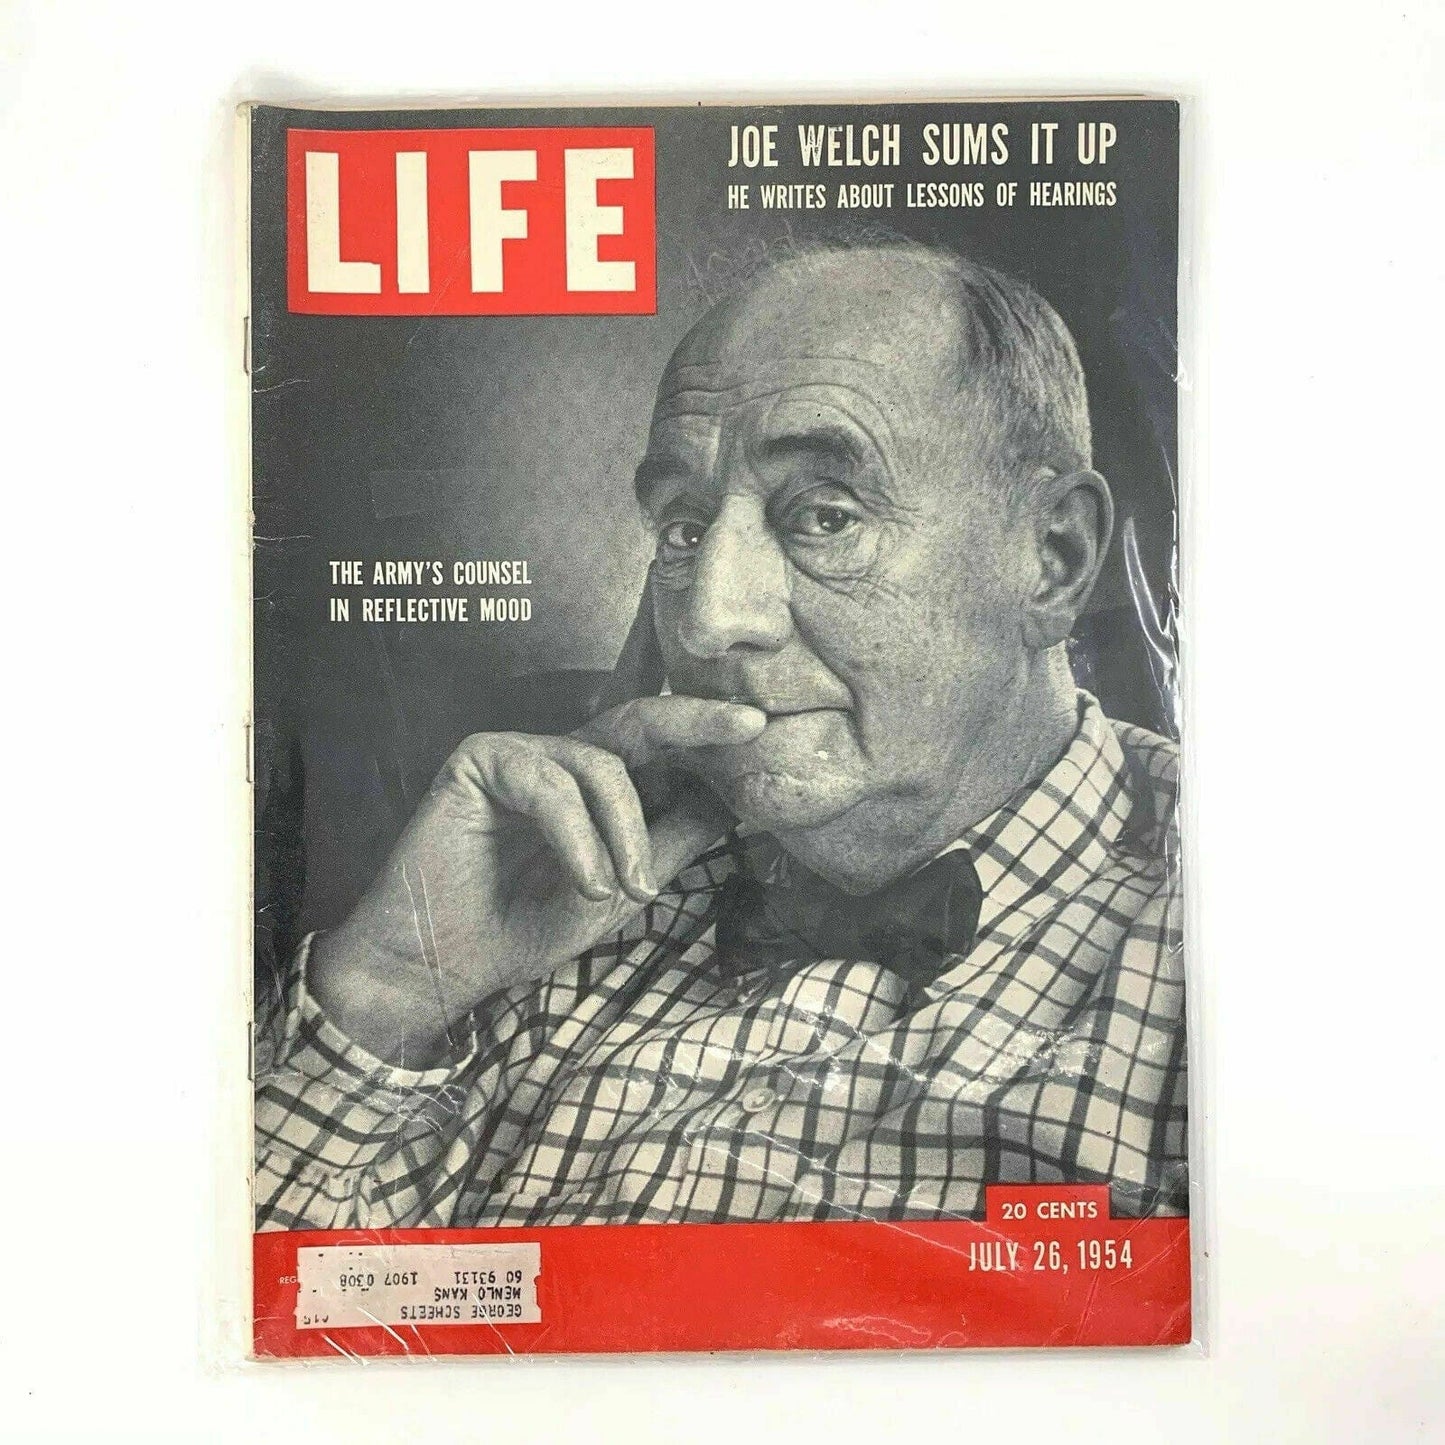 Vintage Life Magazine Full Size “The Army’s Counsel” - July 26, 1954